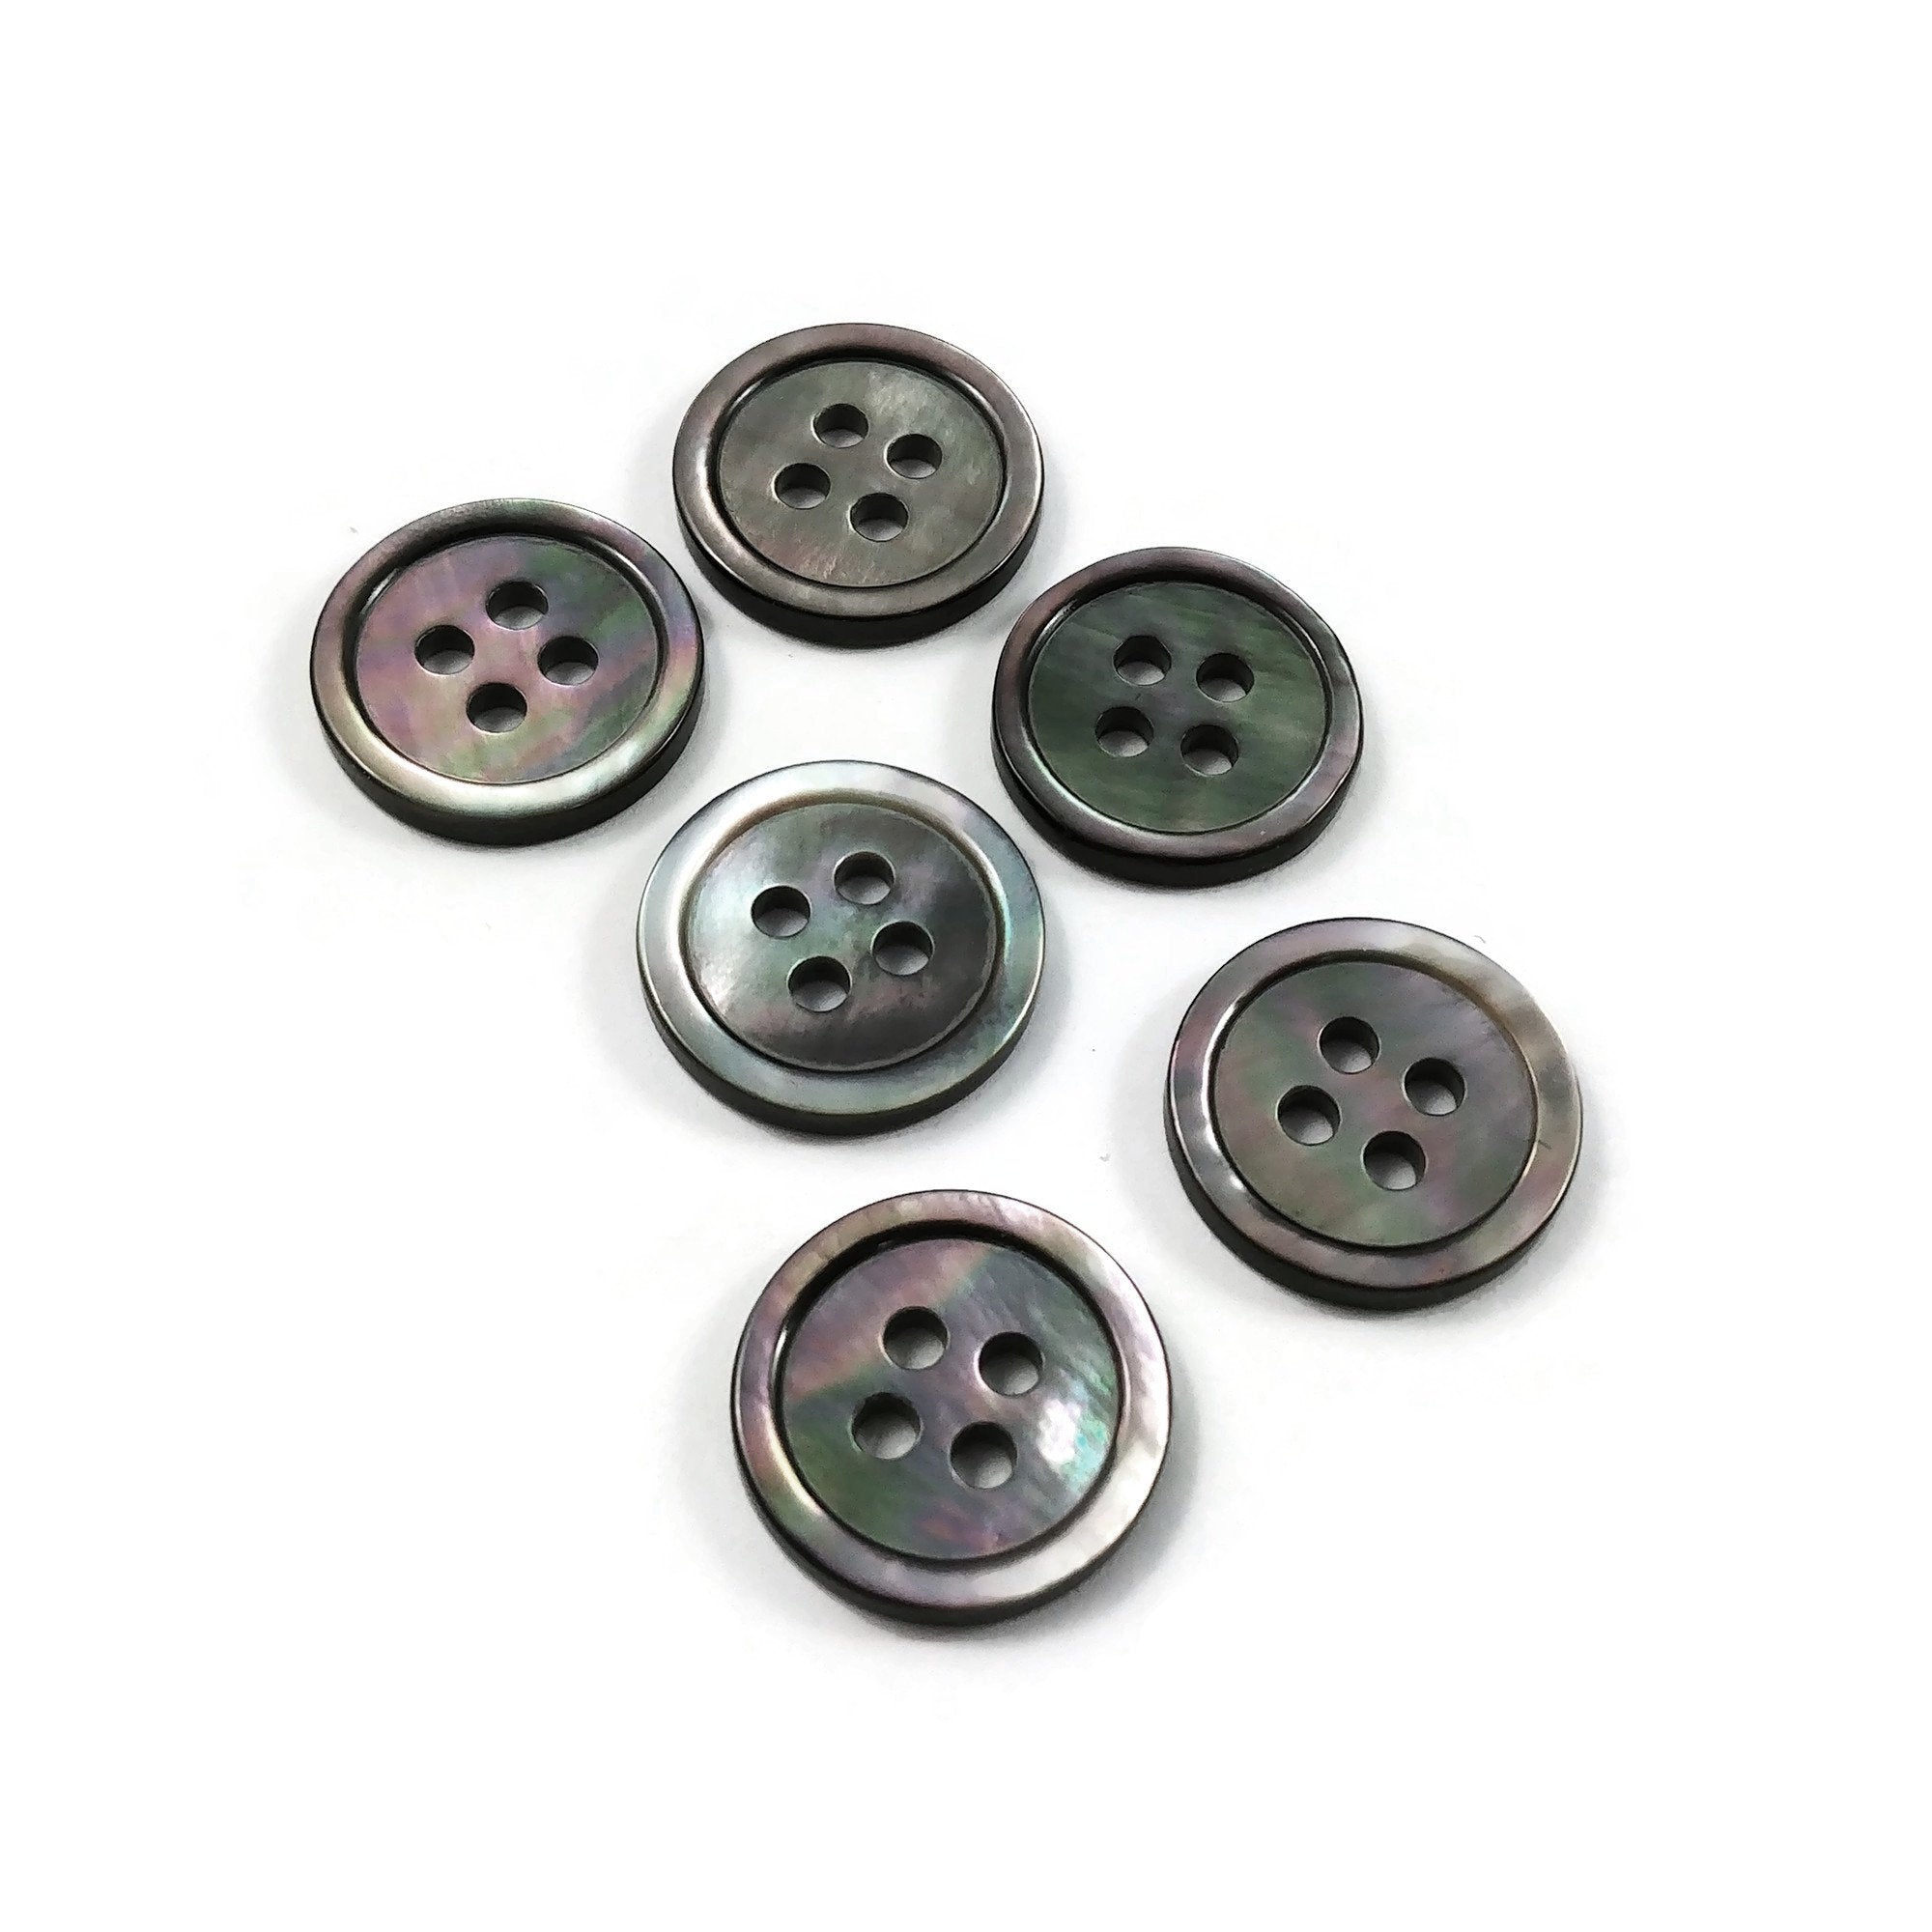 11mm / 10mm Uv Pearl Buttons For Sewing High Grade Fashion Buttons